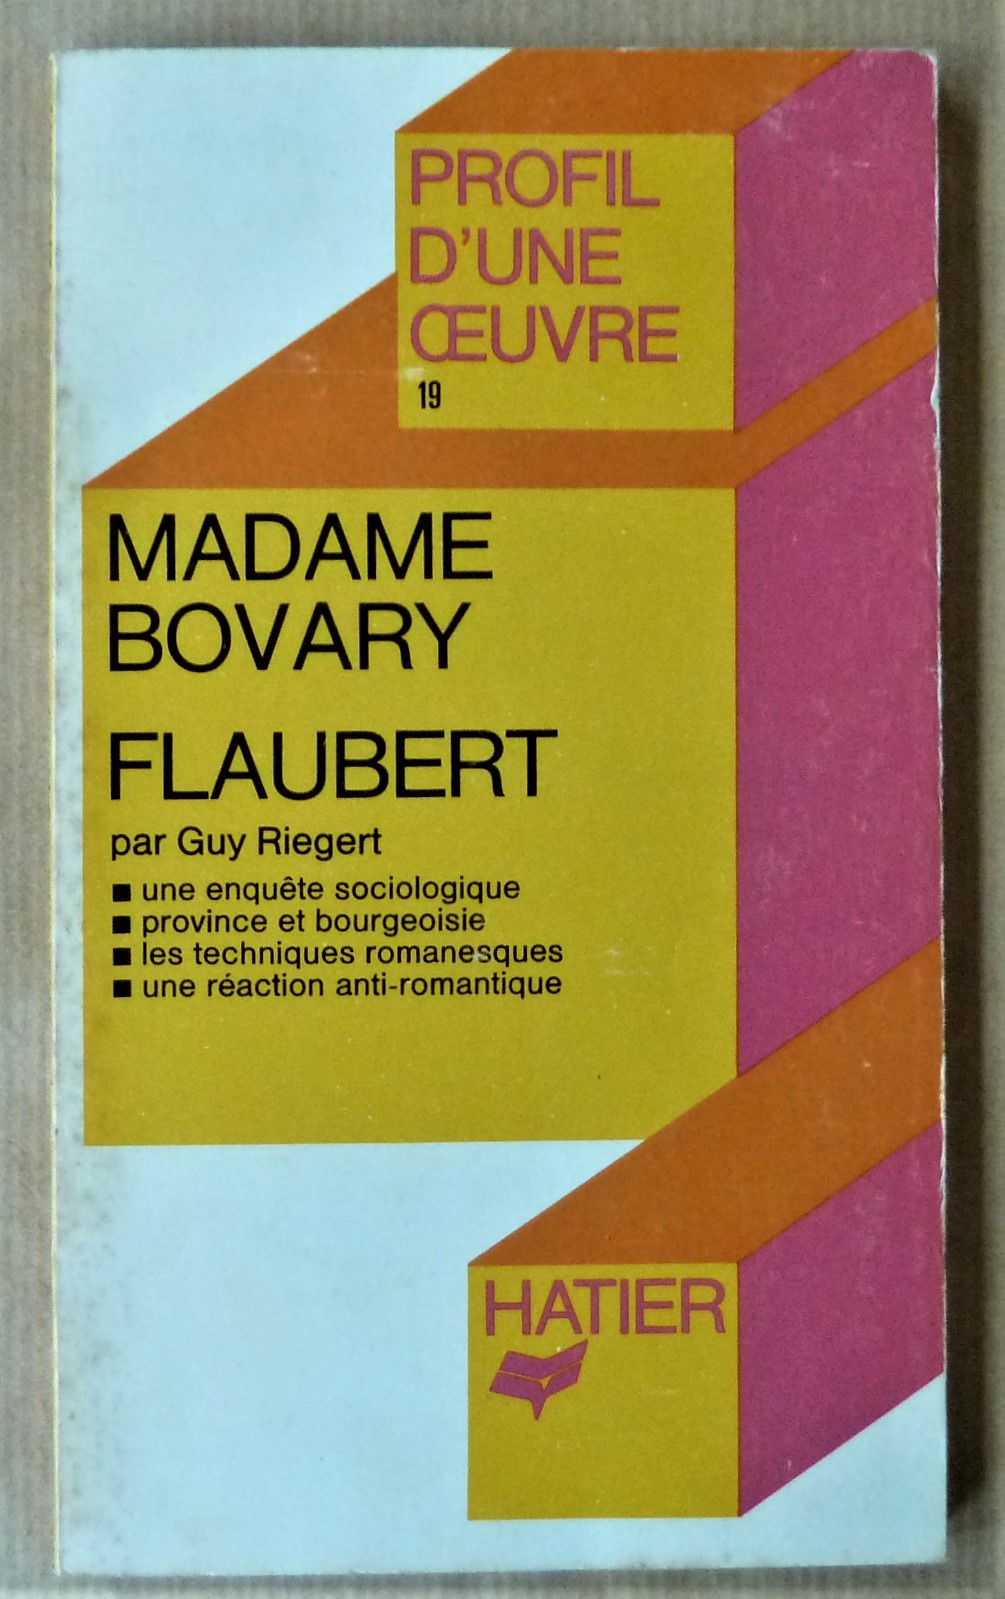 Madame Bovary. Flaubert. Profil d'une oeuvre N°19.